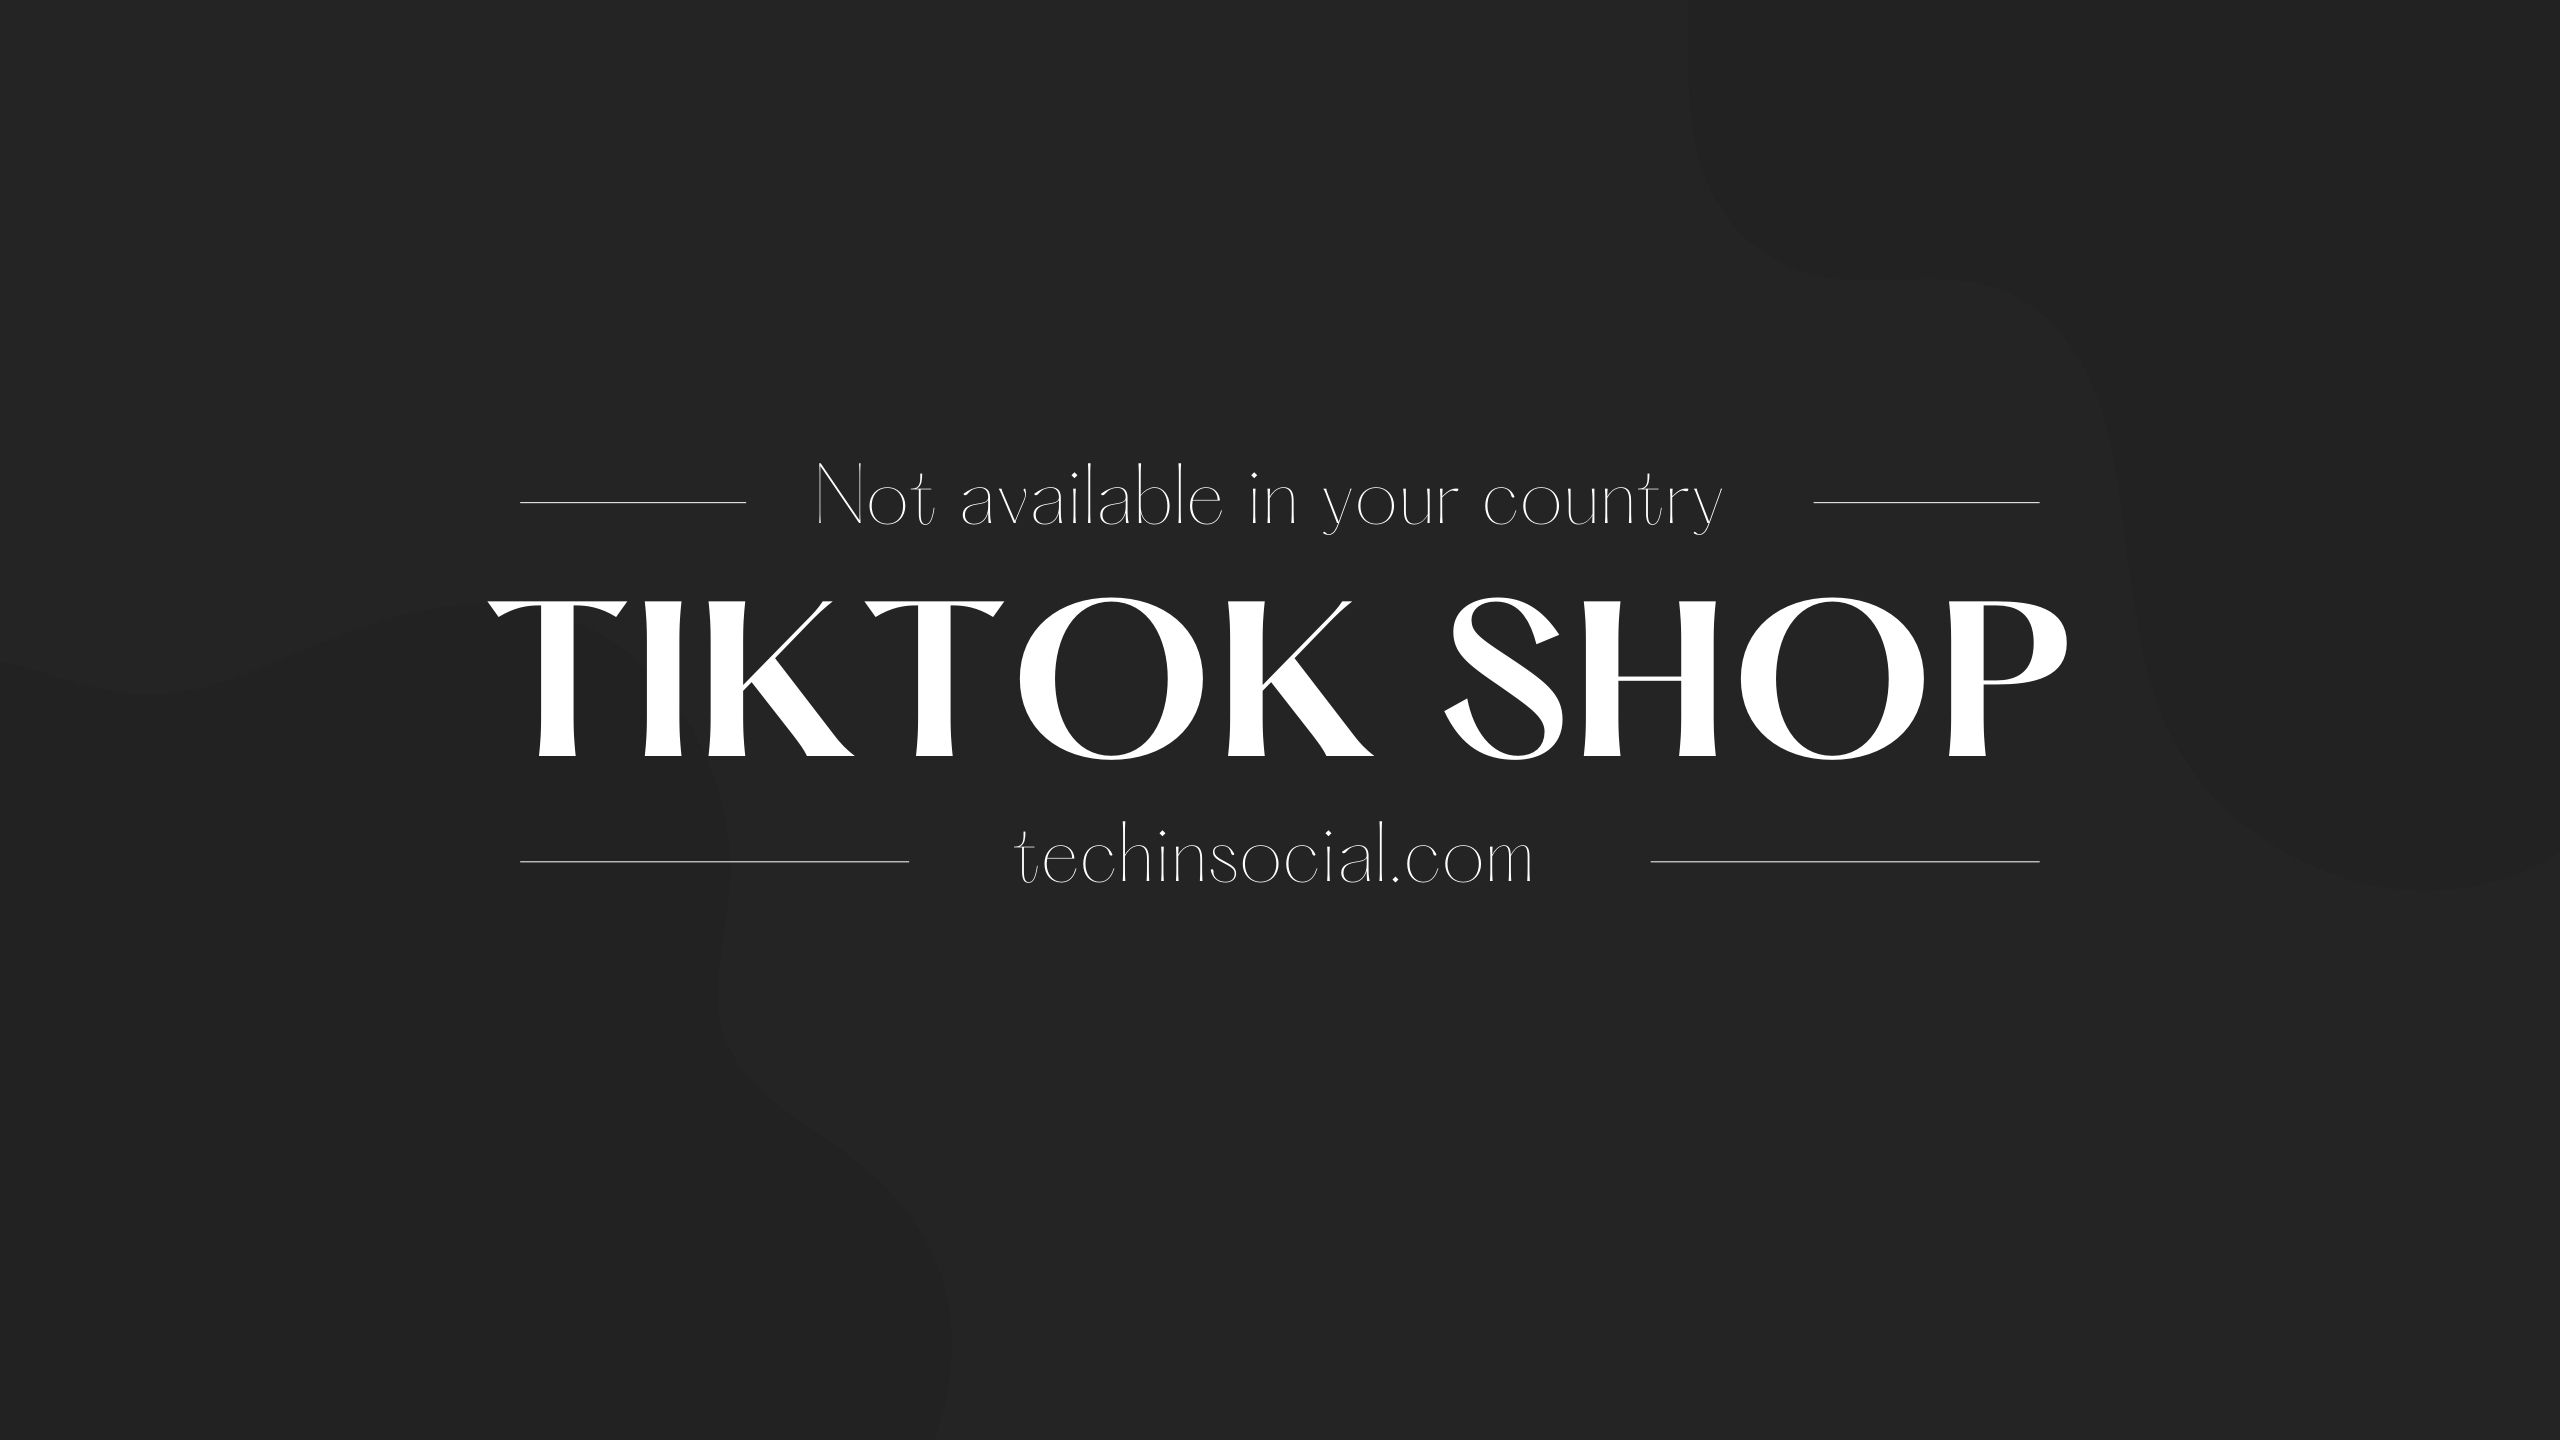 TikTok shop not available in your Region